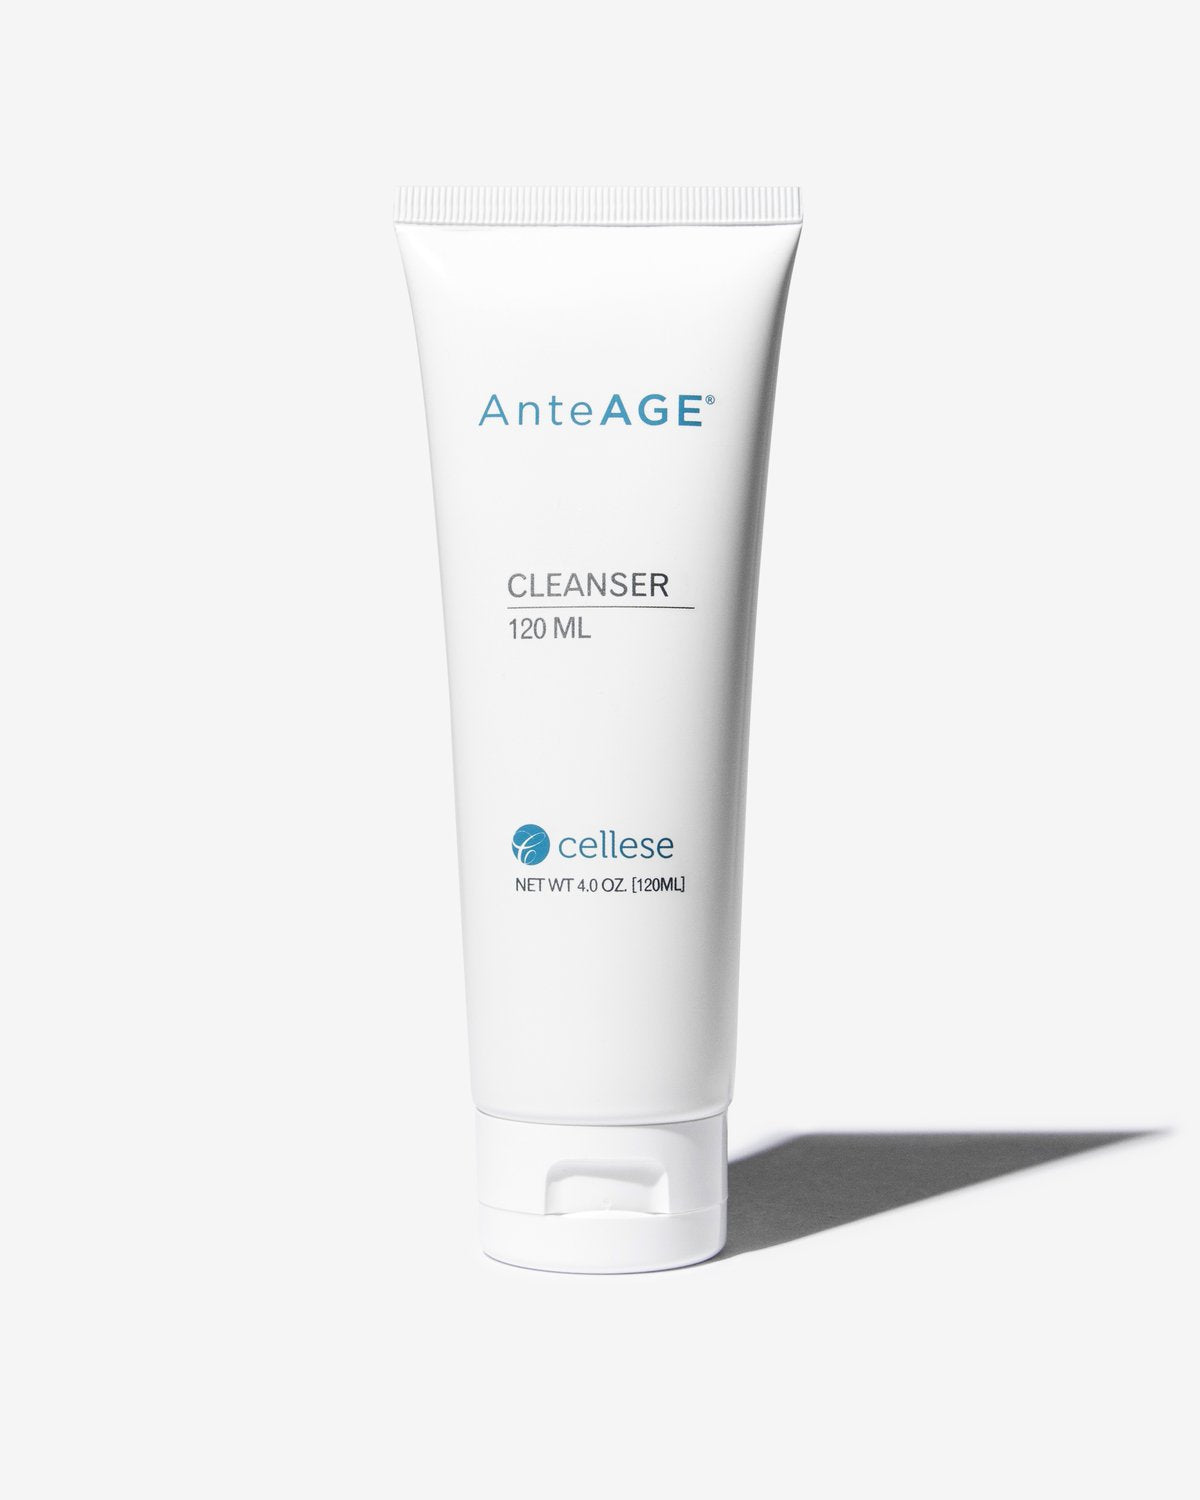 AnteAGE® Cleanser - Click to Buy!